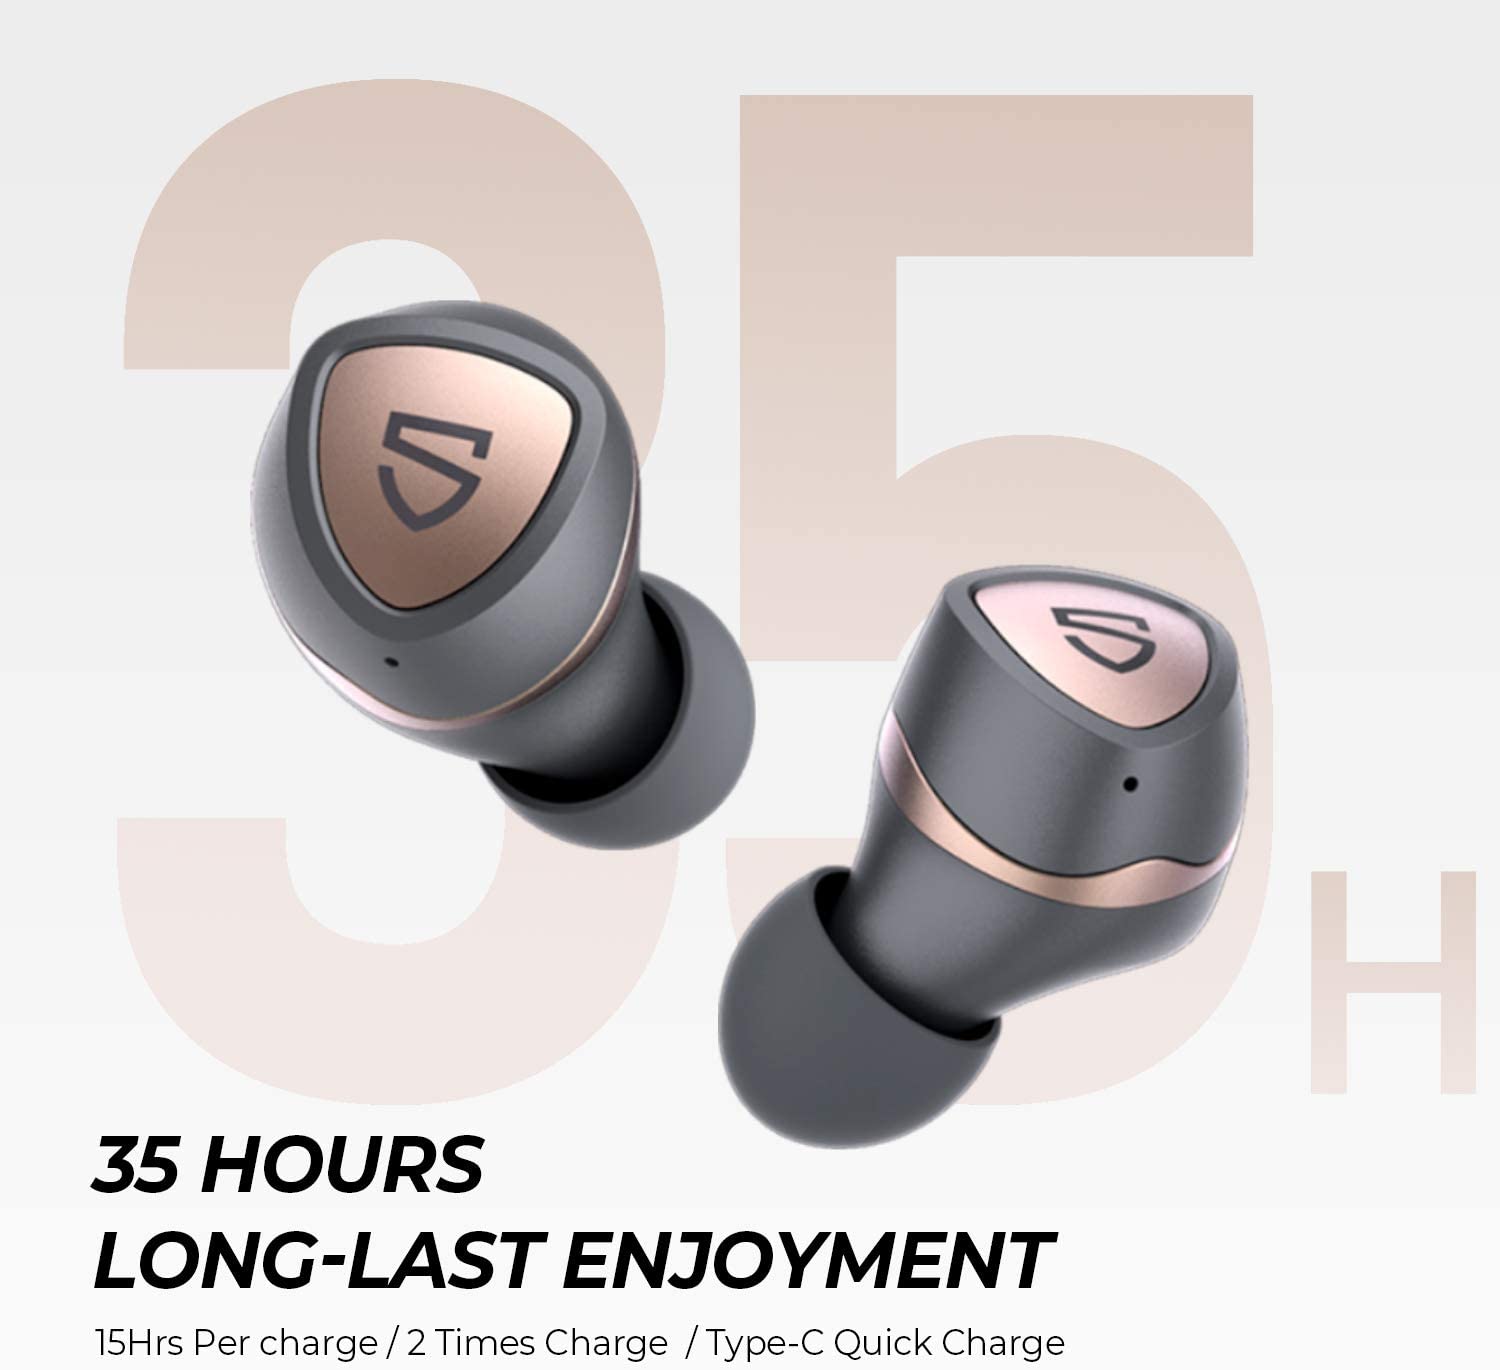 SoundPEATS Sonic TWS Earbuds, Battery Up to 15h, IPX5